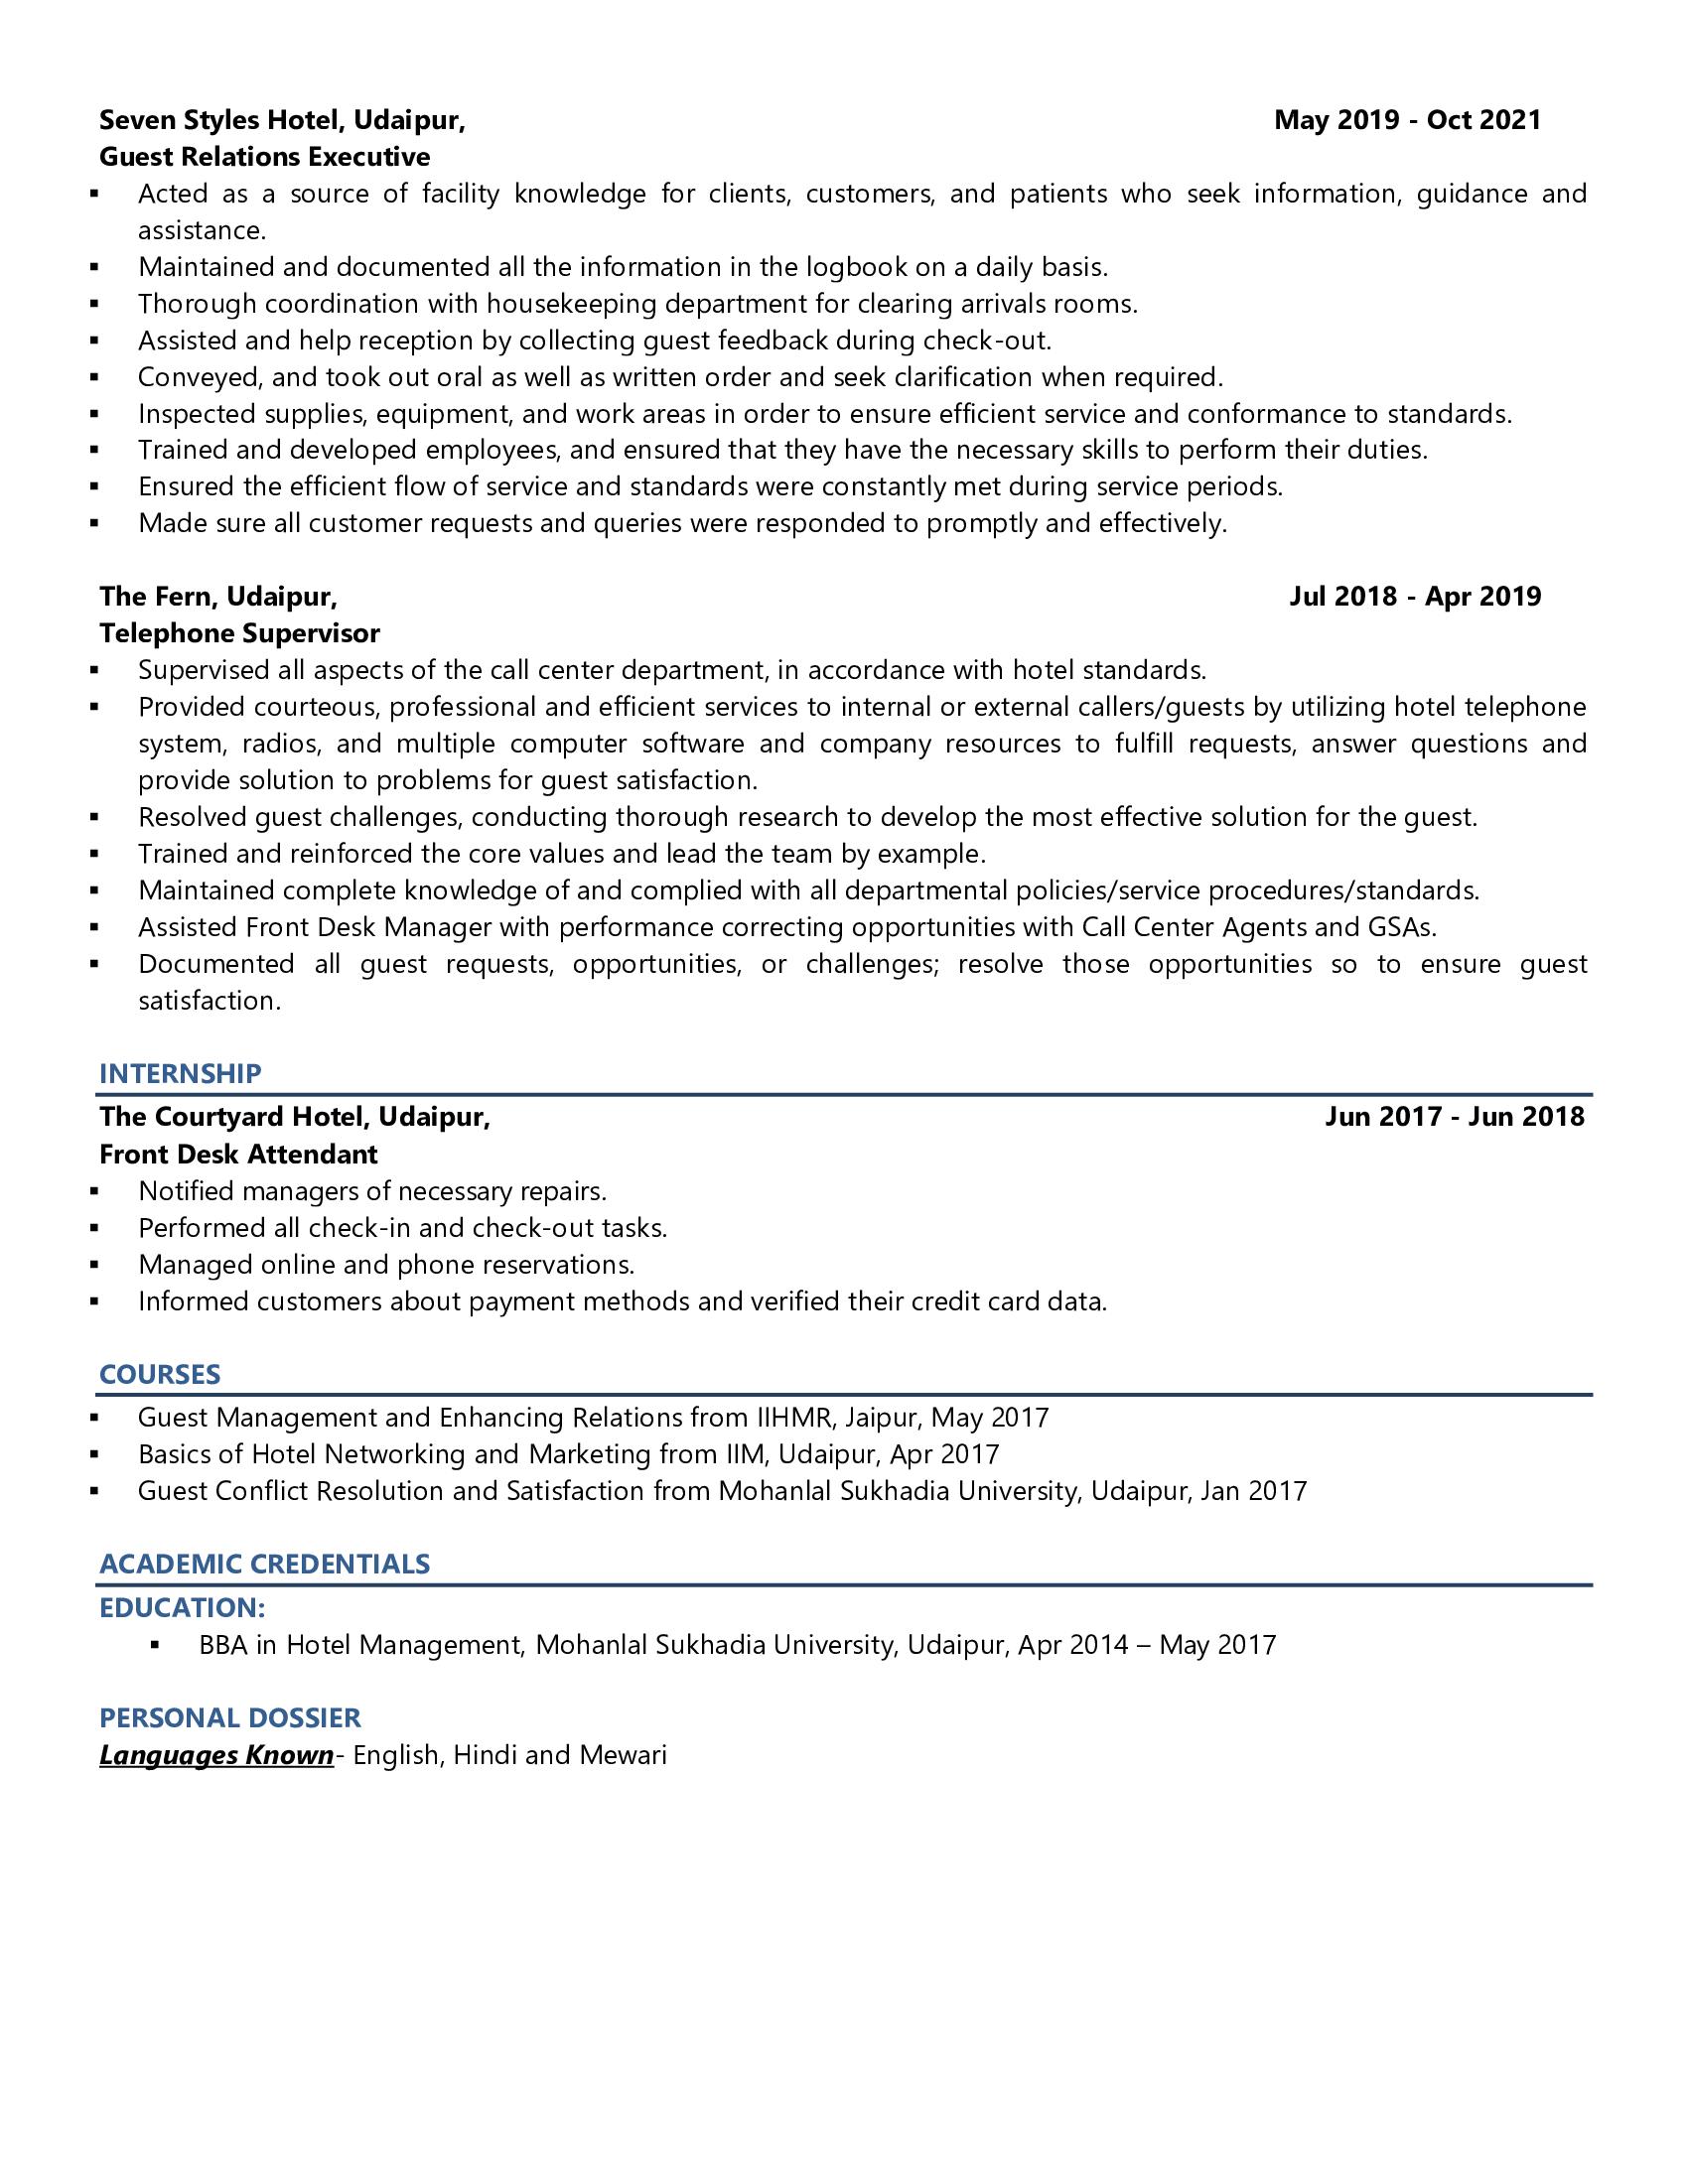 Guests Relations Manager - Resume Example & Template